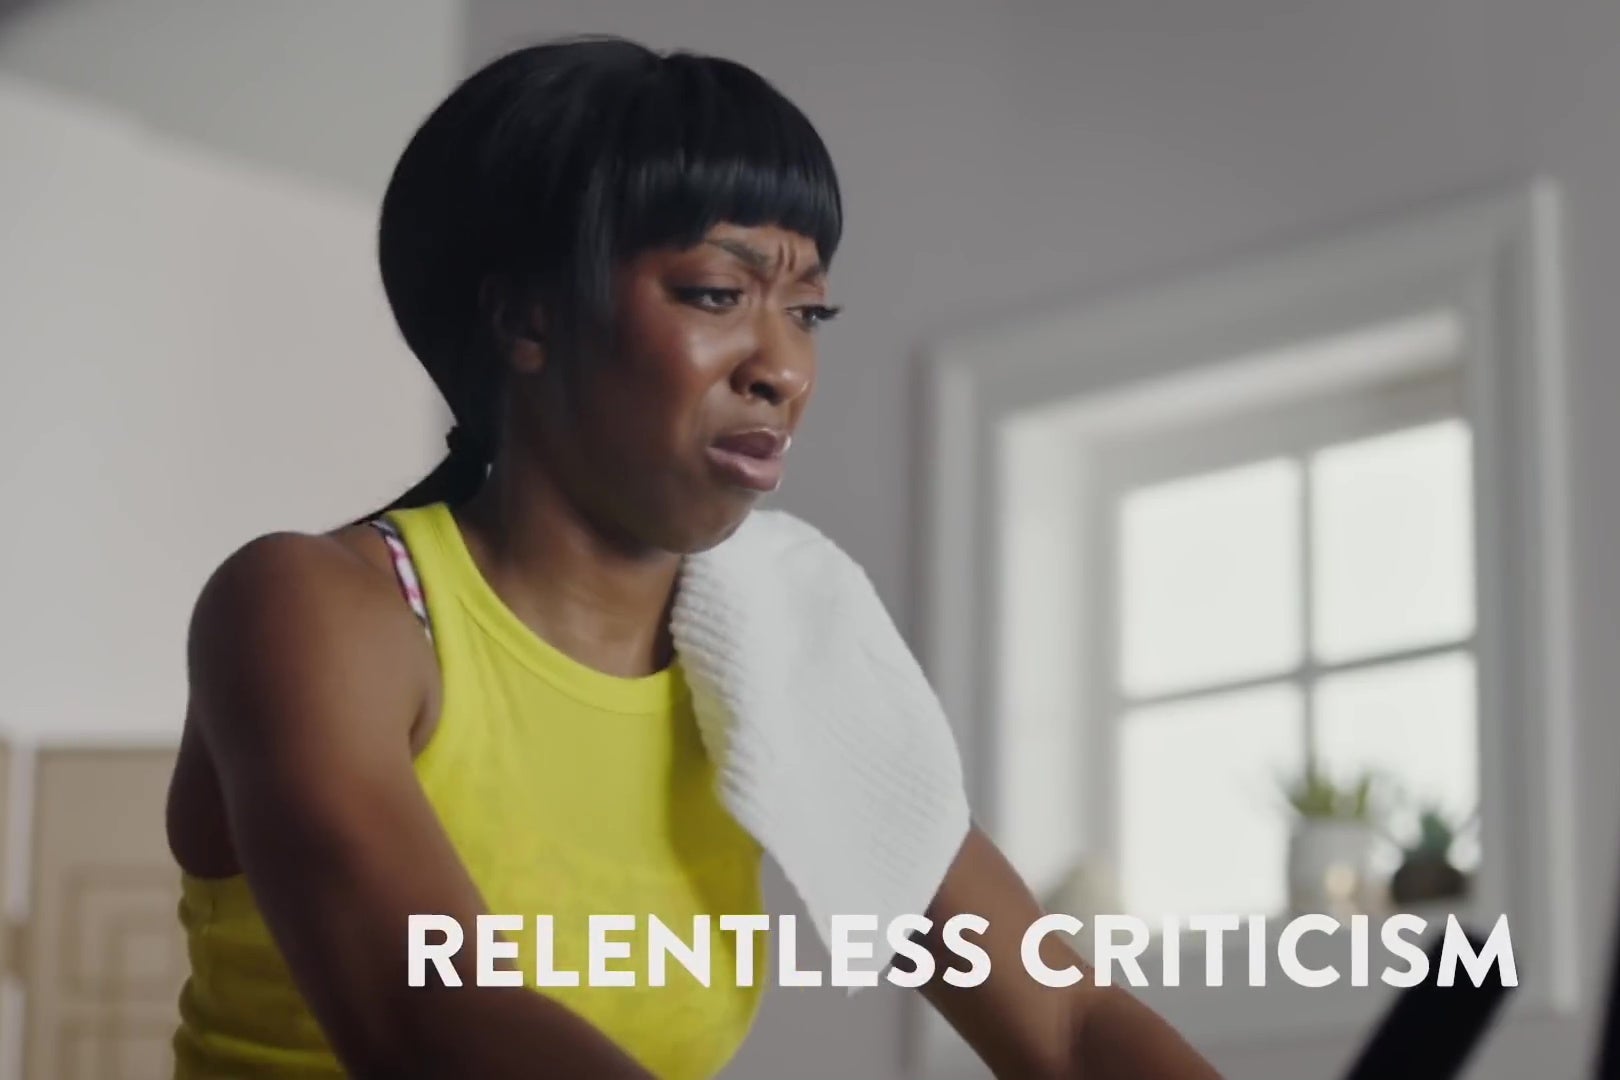 Ego Nwodim, on an exercise bike, looks at the view screen in disgust. A chyron reads "RELENTLESS CRITICISM."